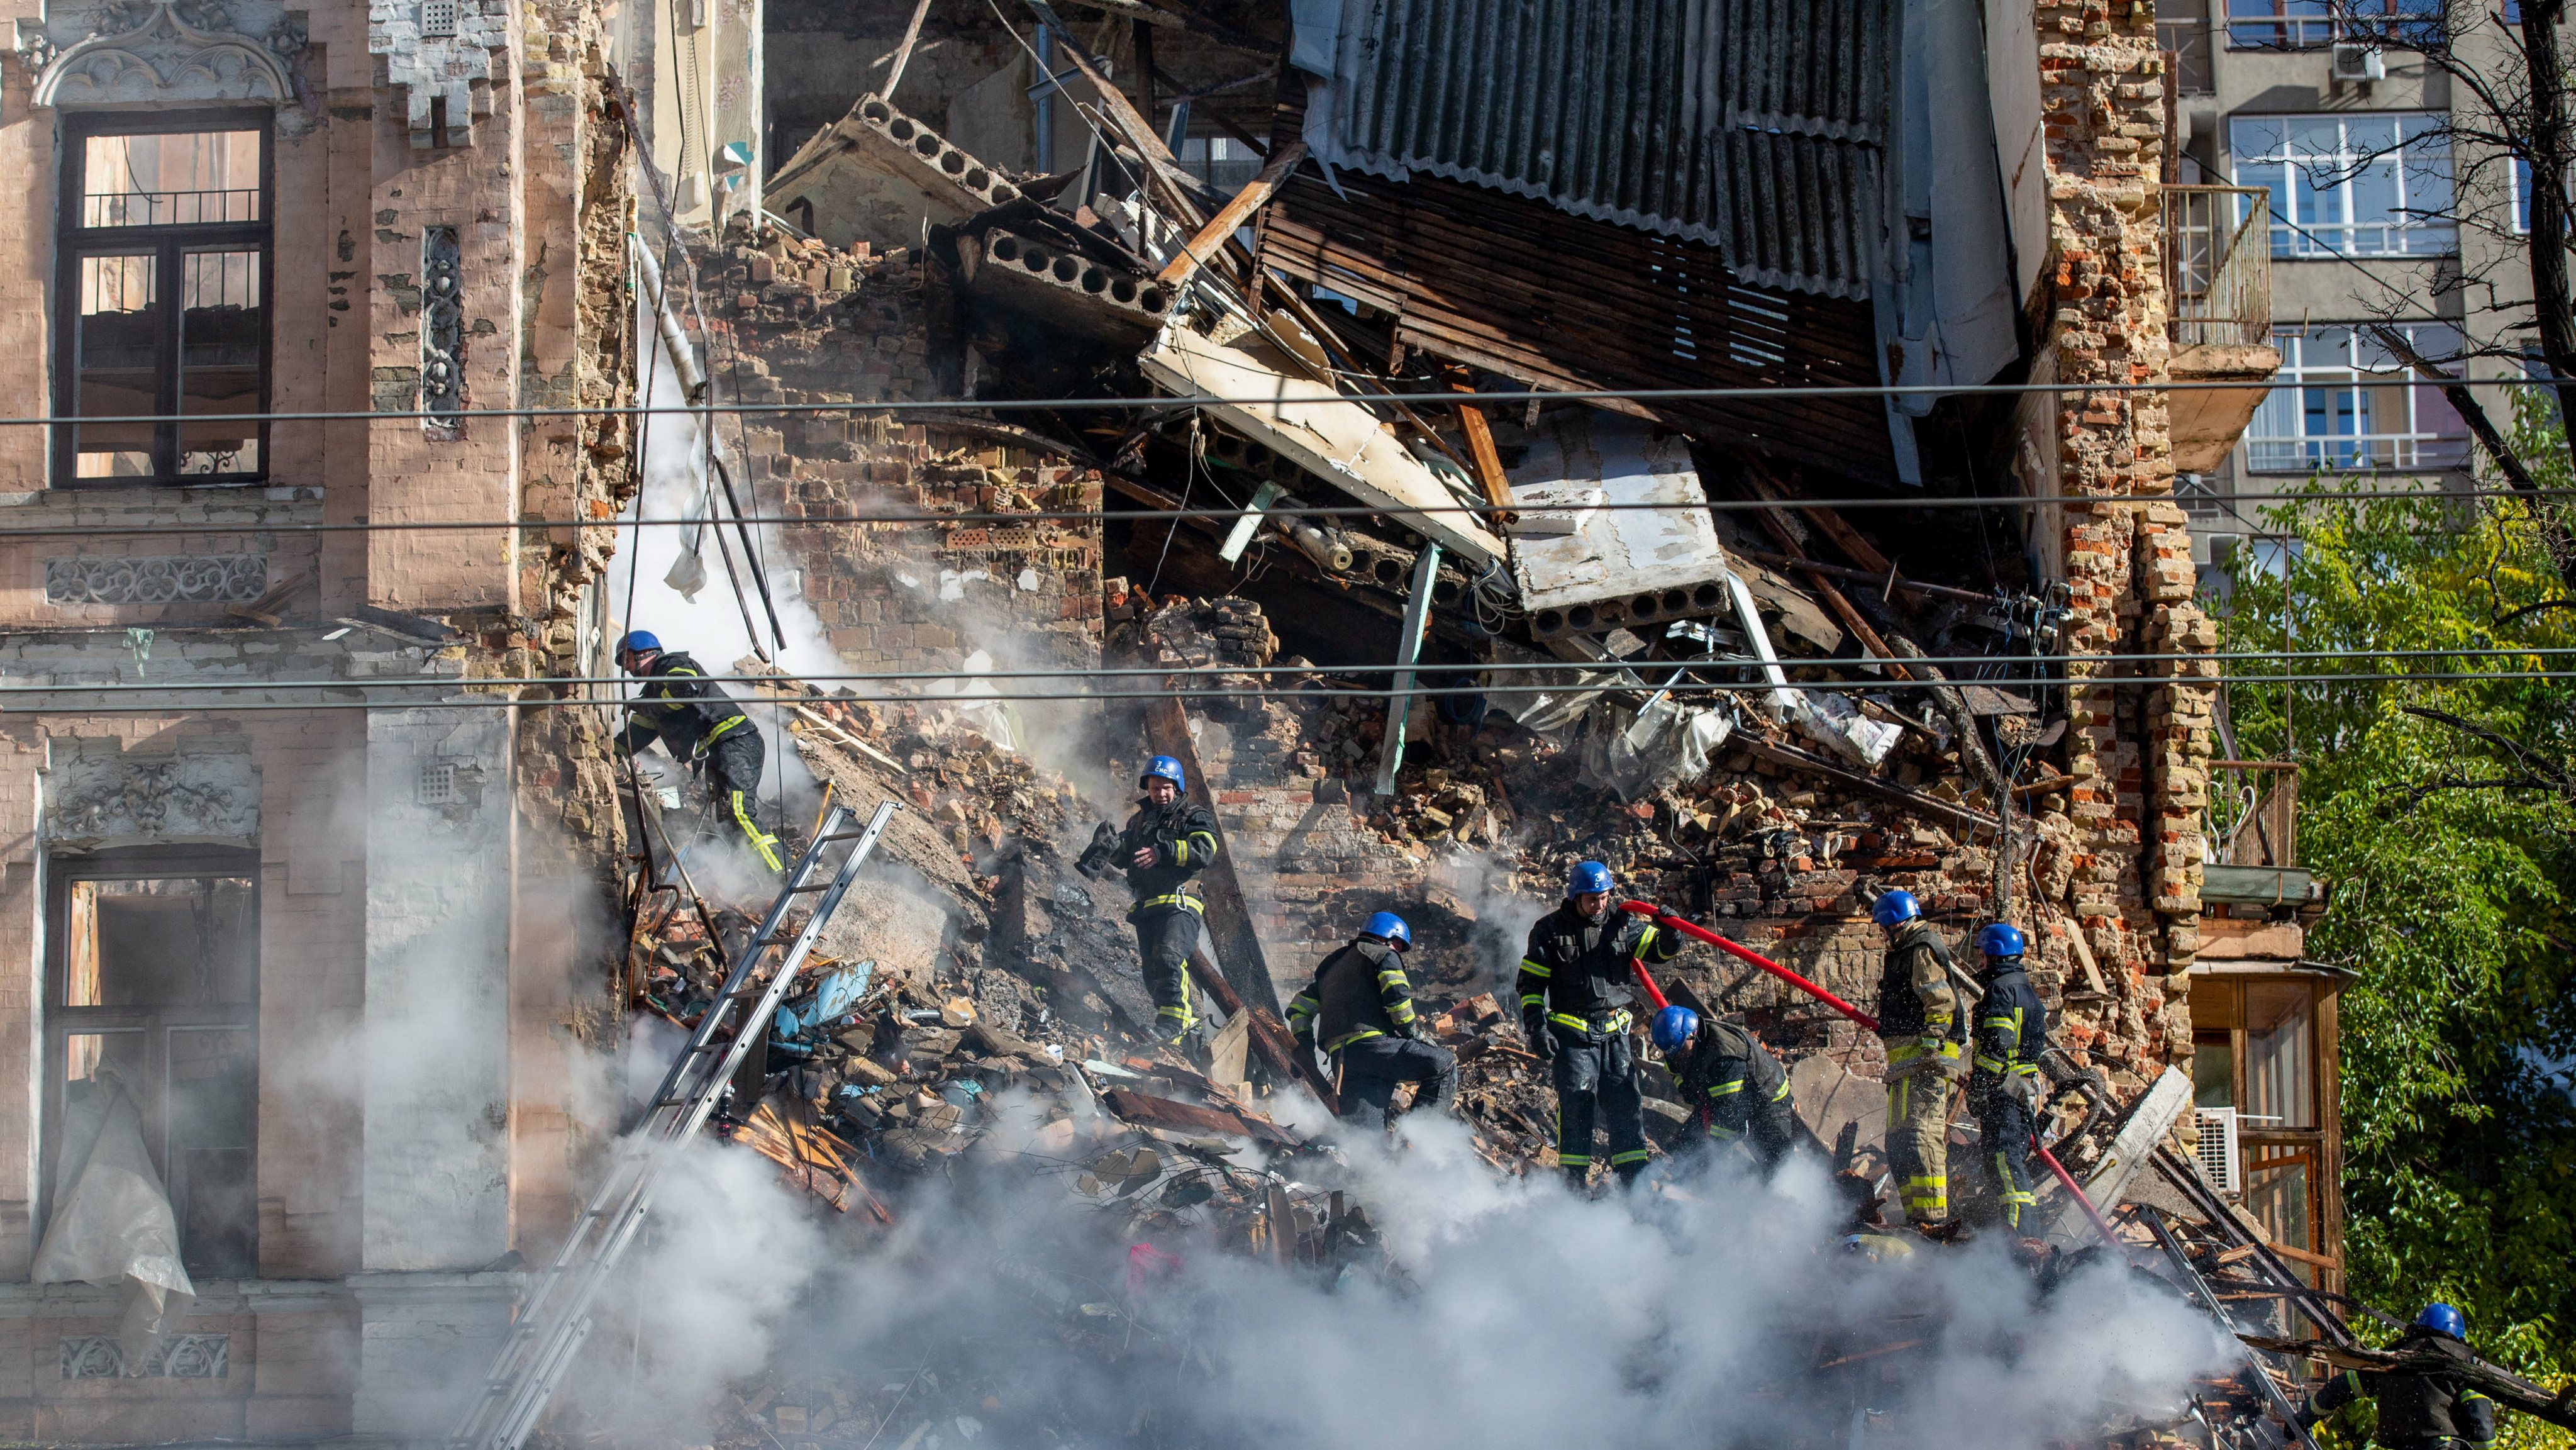 Ukrainian rescuers work at the site of a residential